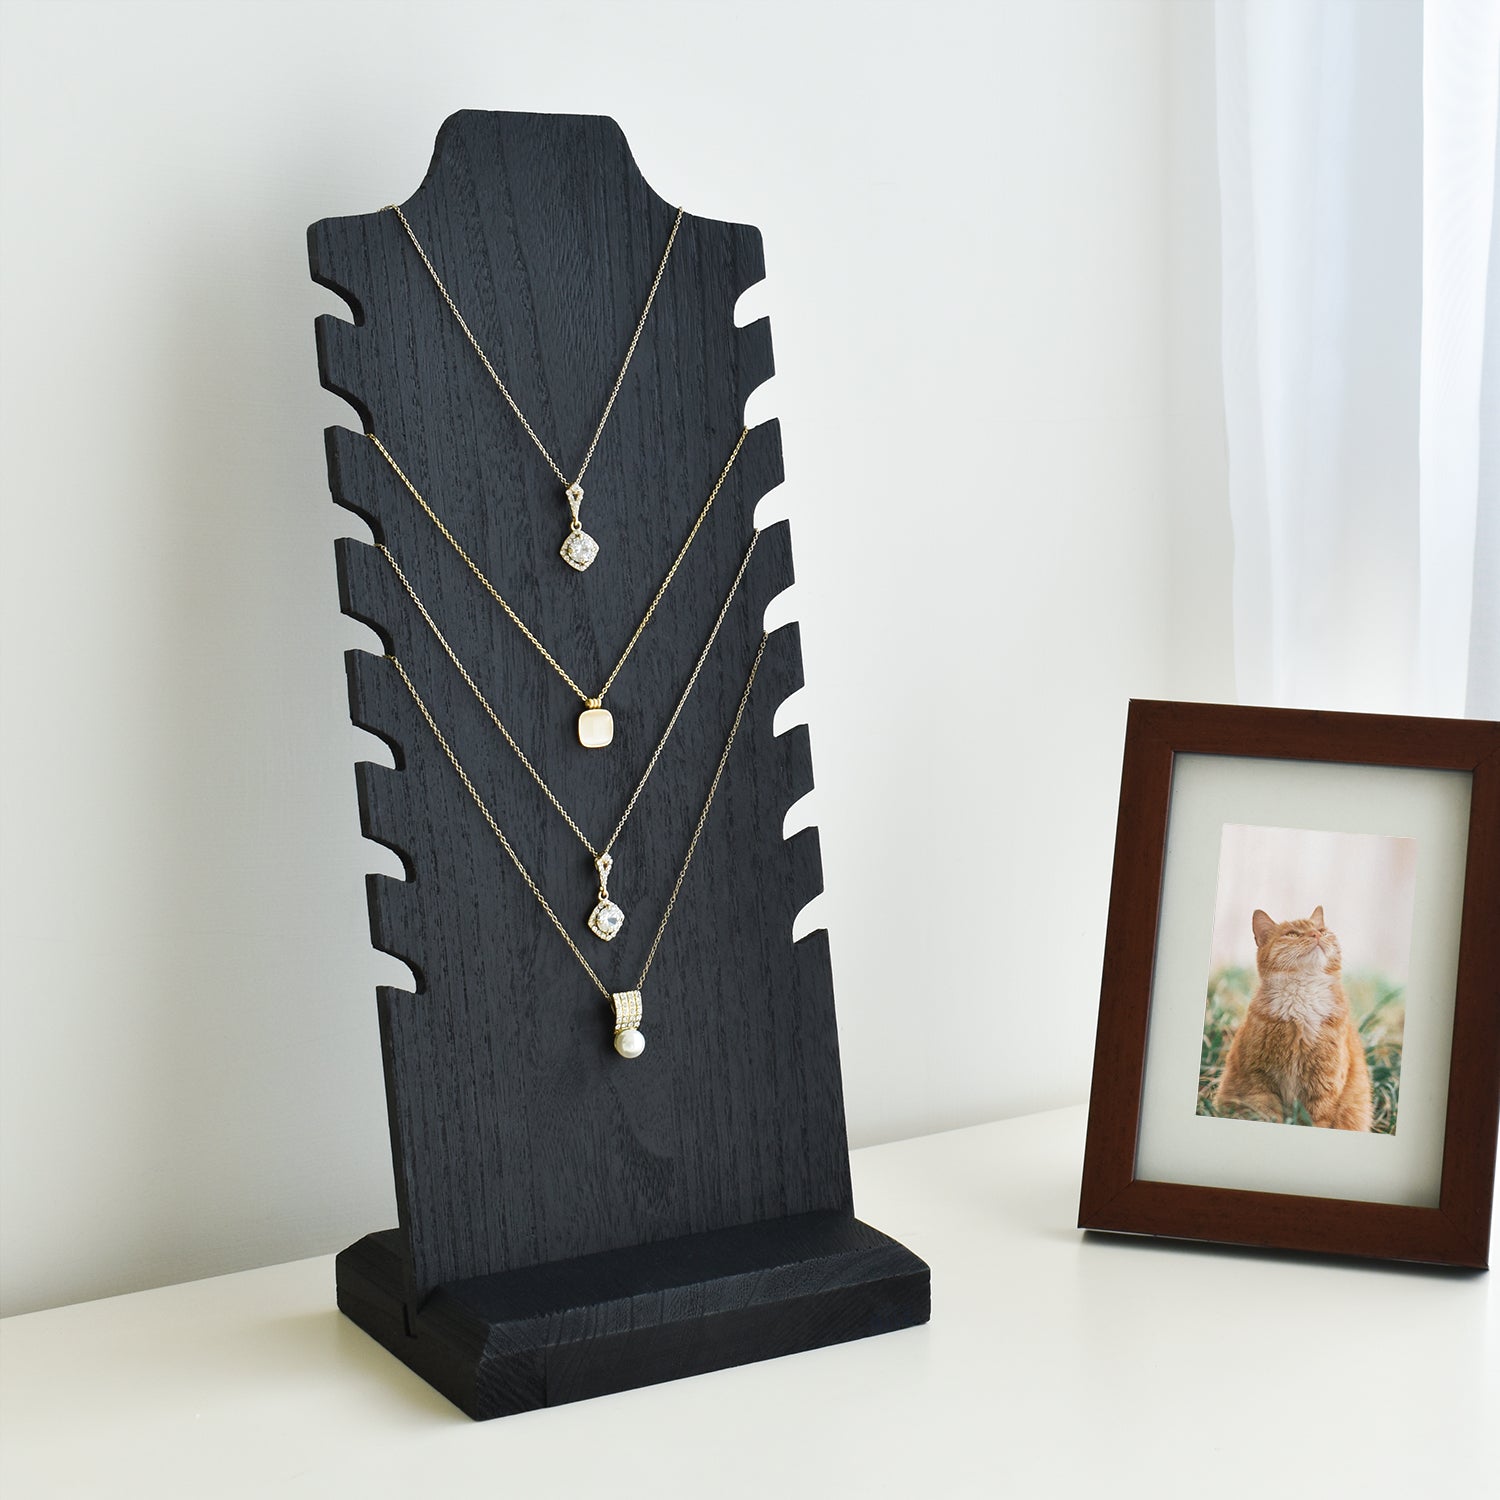 Necklace Display Busts - White Leatherette - 4 Sizes Available (G211-4WL)